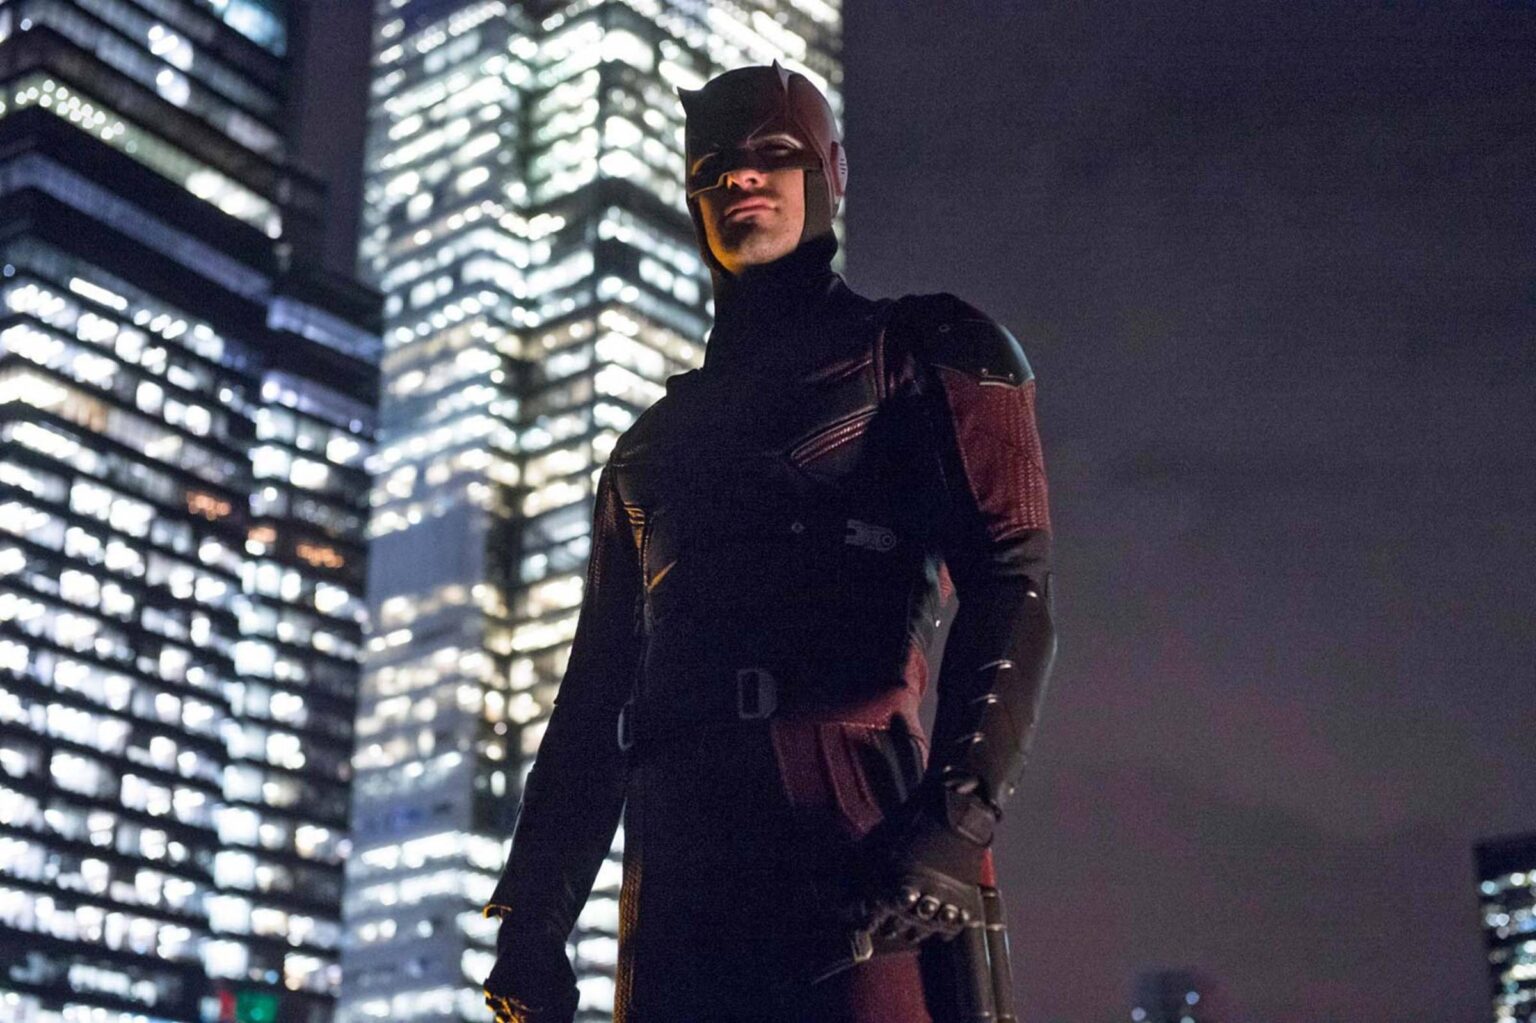 Perhaps the biggest drawback of Disney’s acquisition of Marvel Studios was the death of Netflix’s Marvel shows. Could we see 'Daredevil' season 4?